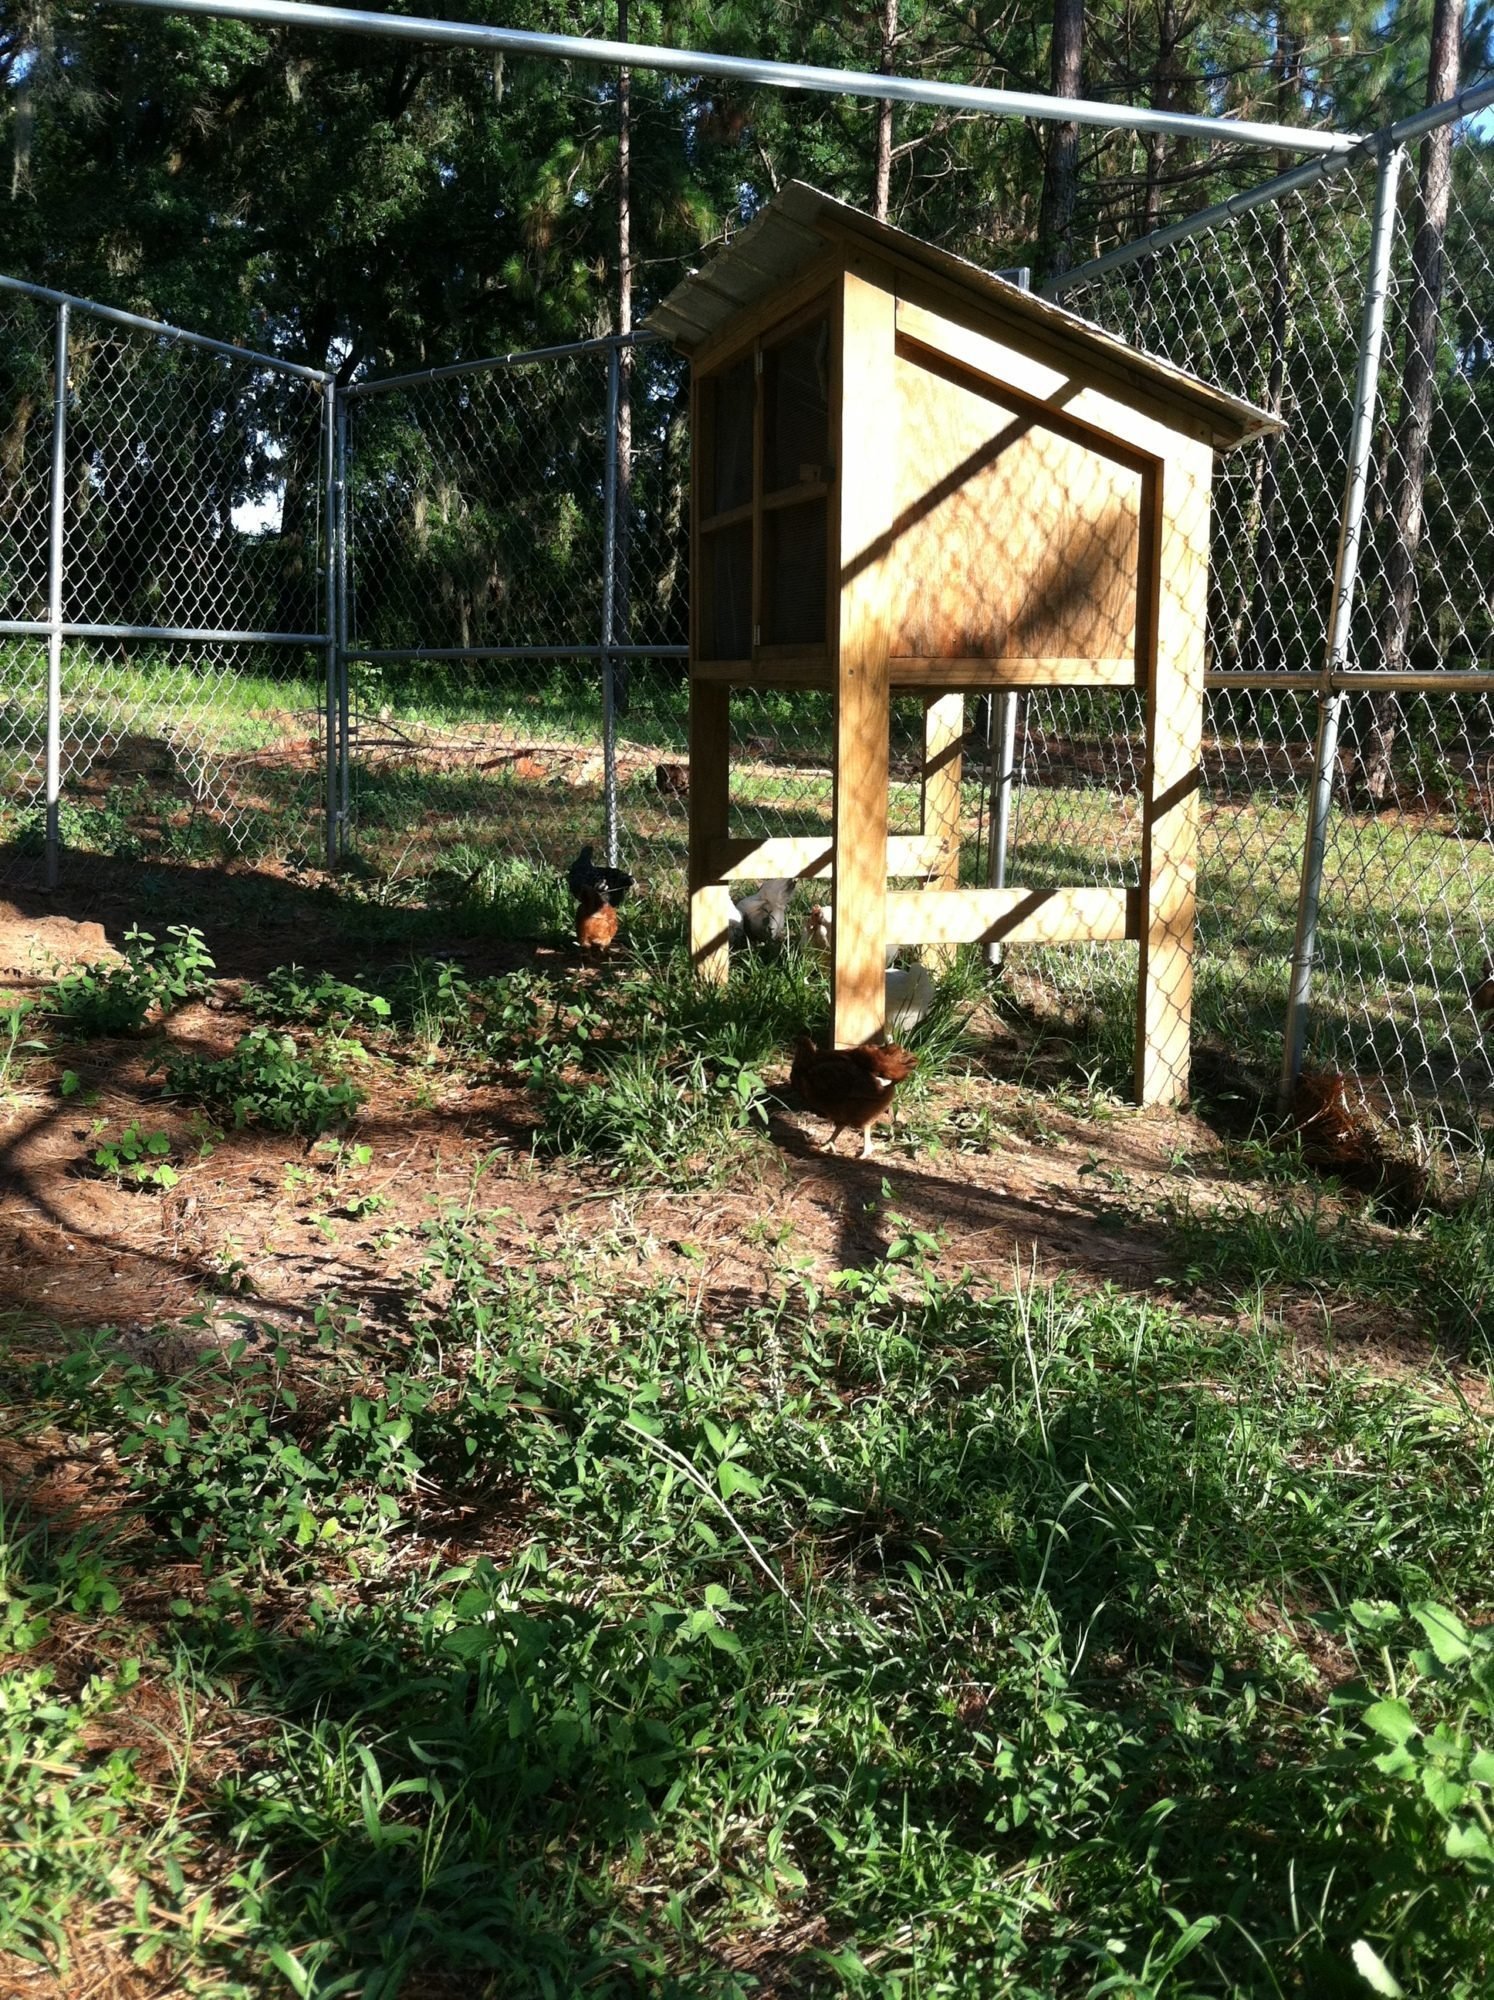 Pros and cons of chain link panels for run? | BackYard Chickens - Learn How  to Raise Chickens